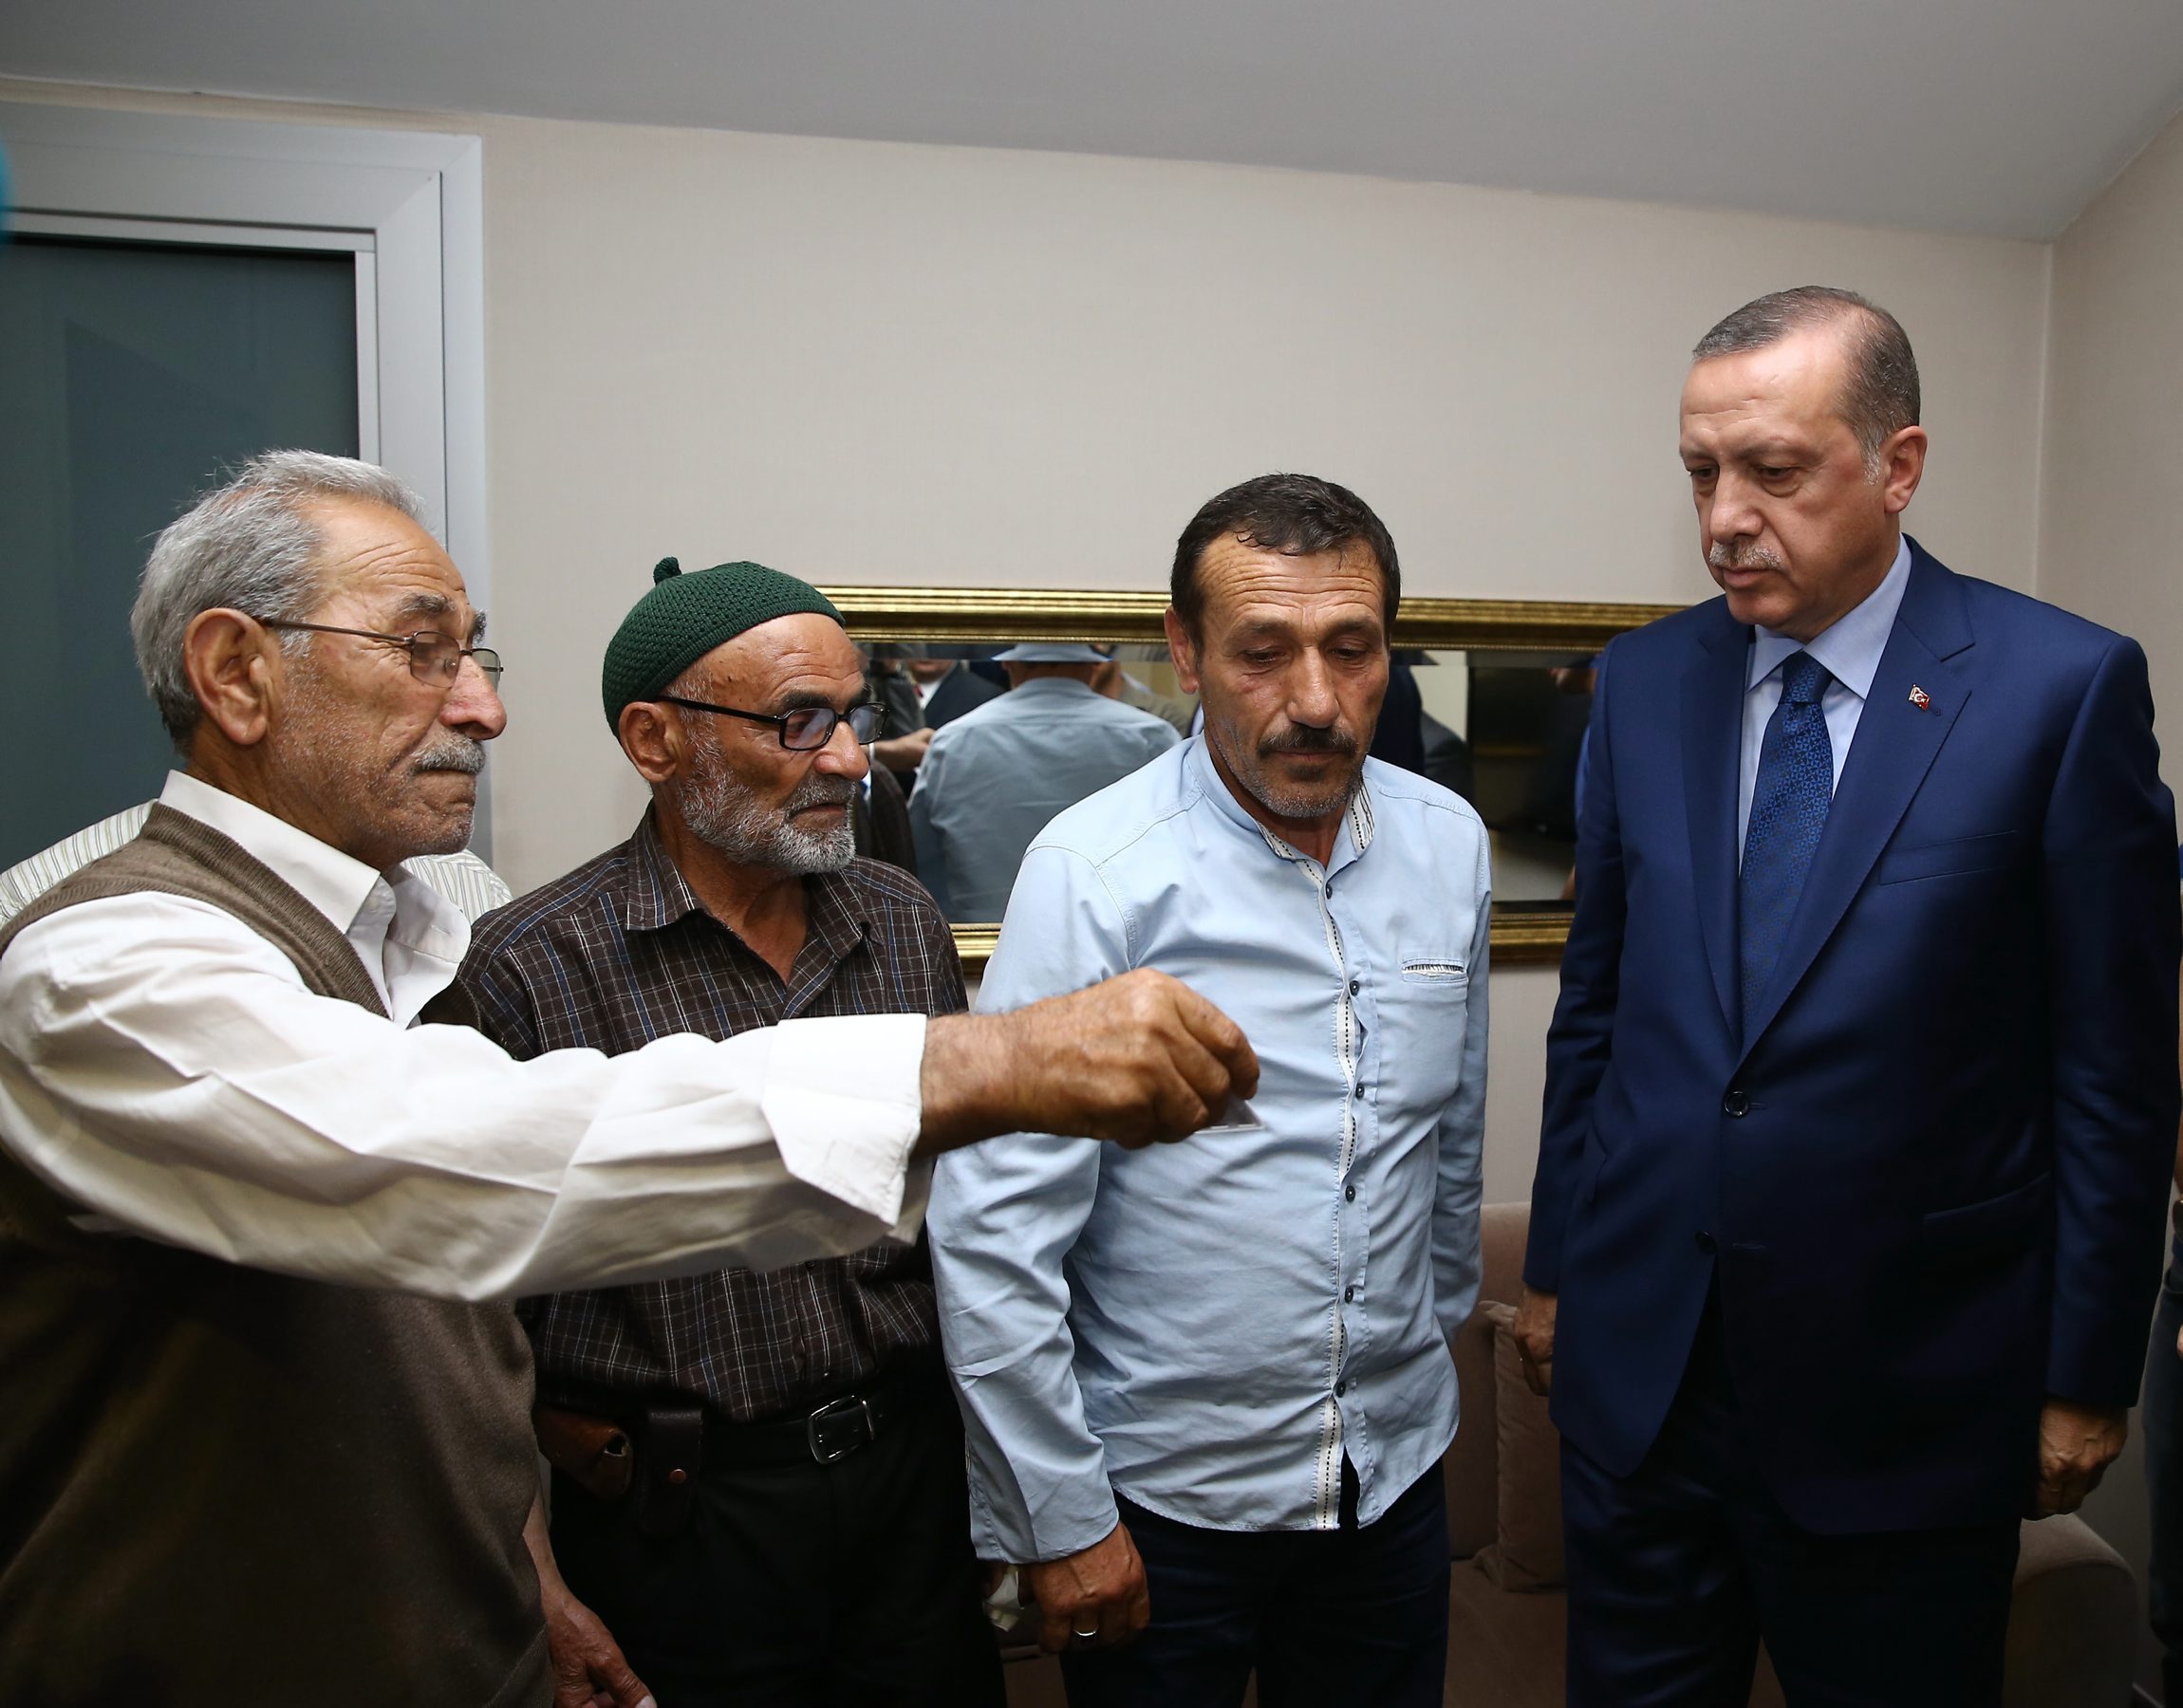 President Erdoğan wished patience and strength to the family of the martyr including the father Ahmet, grandfather Asim, and brother Kadir Yaşar.